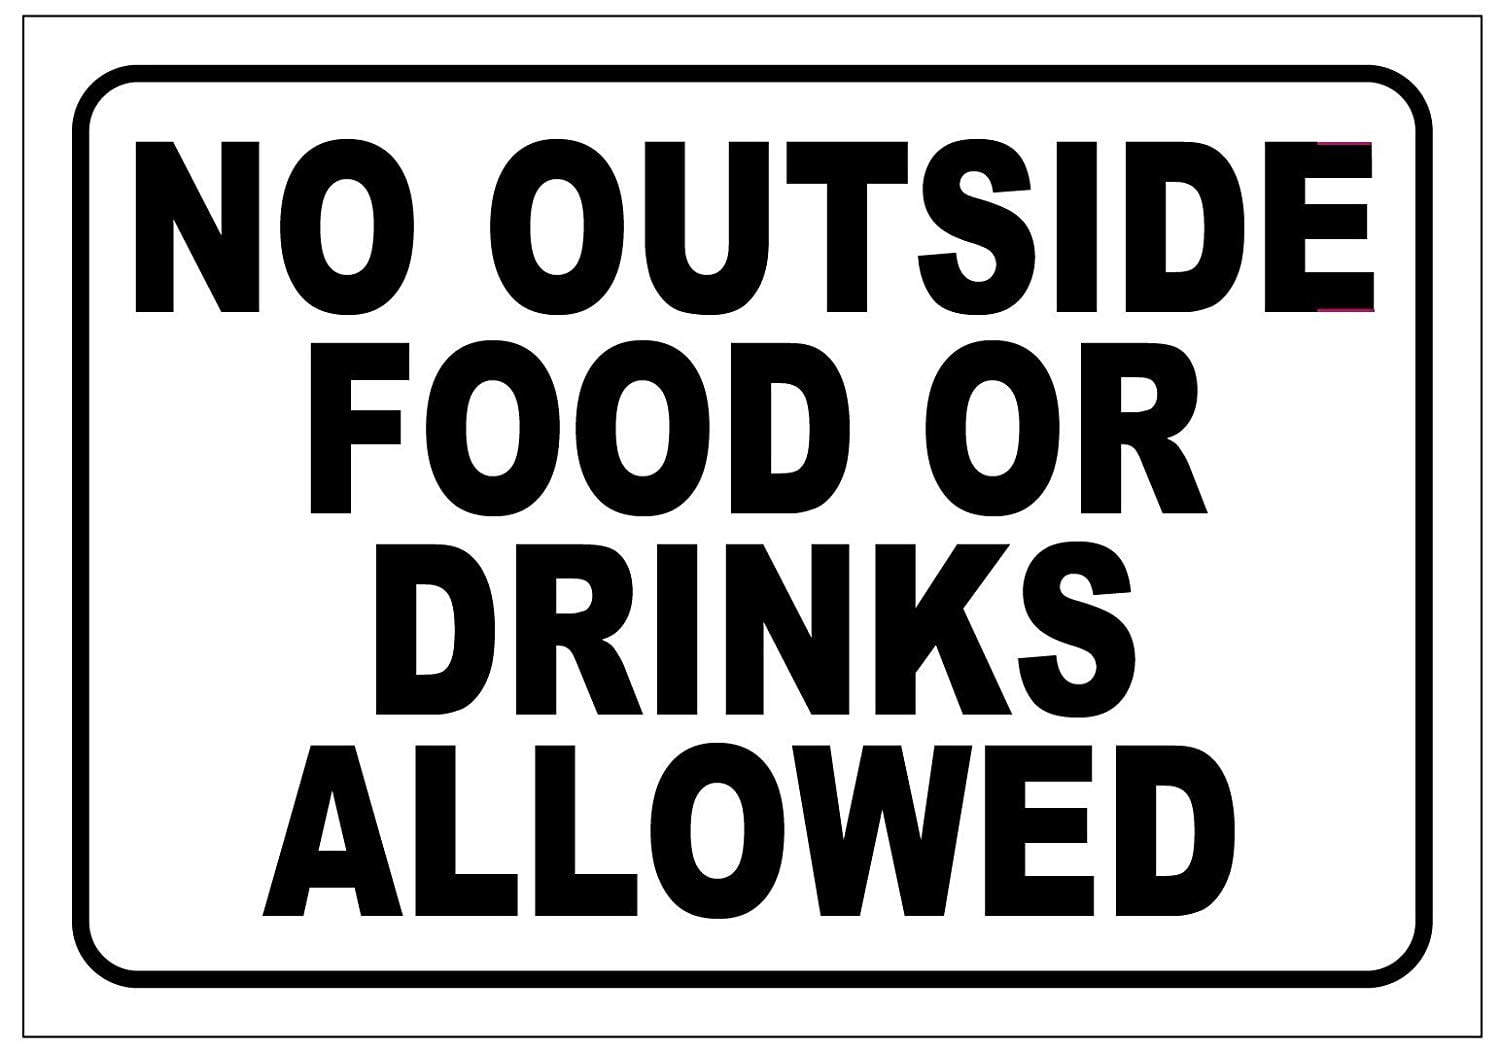 NO FOOD OR DRINK Sticker Decal waterproof outdoor high quality white background 